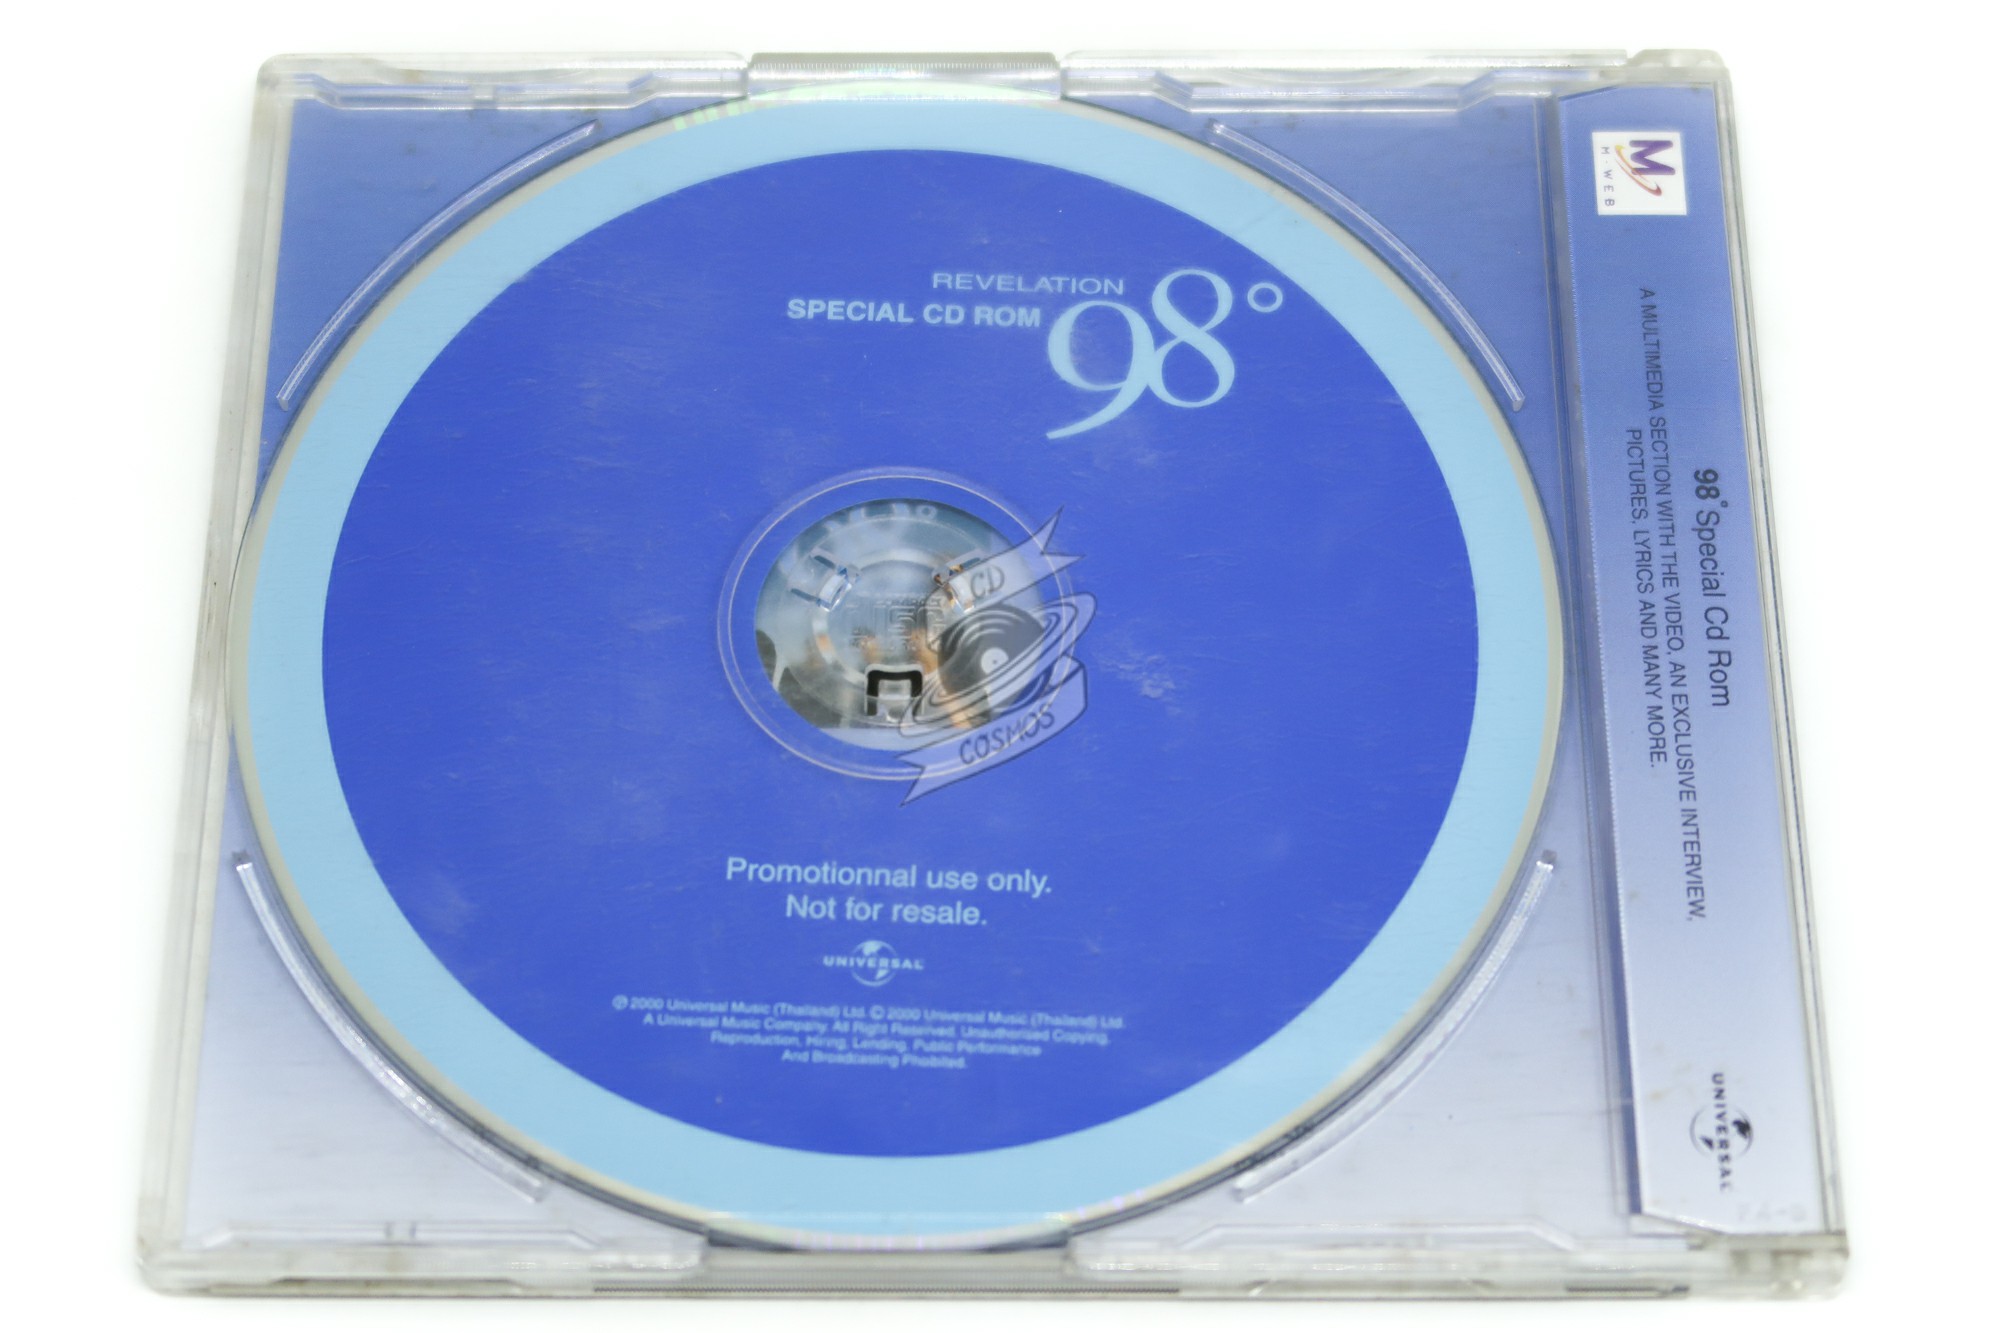 98° - REVELATION Cd - Music/Movies/Books/Magazines for sale in